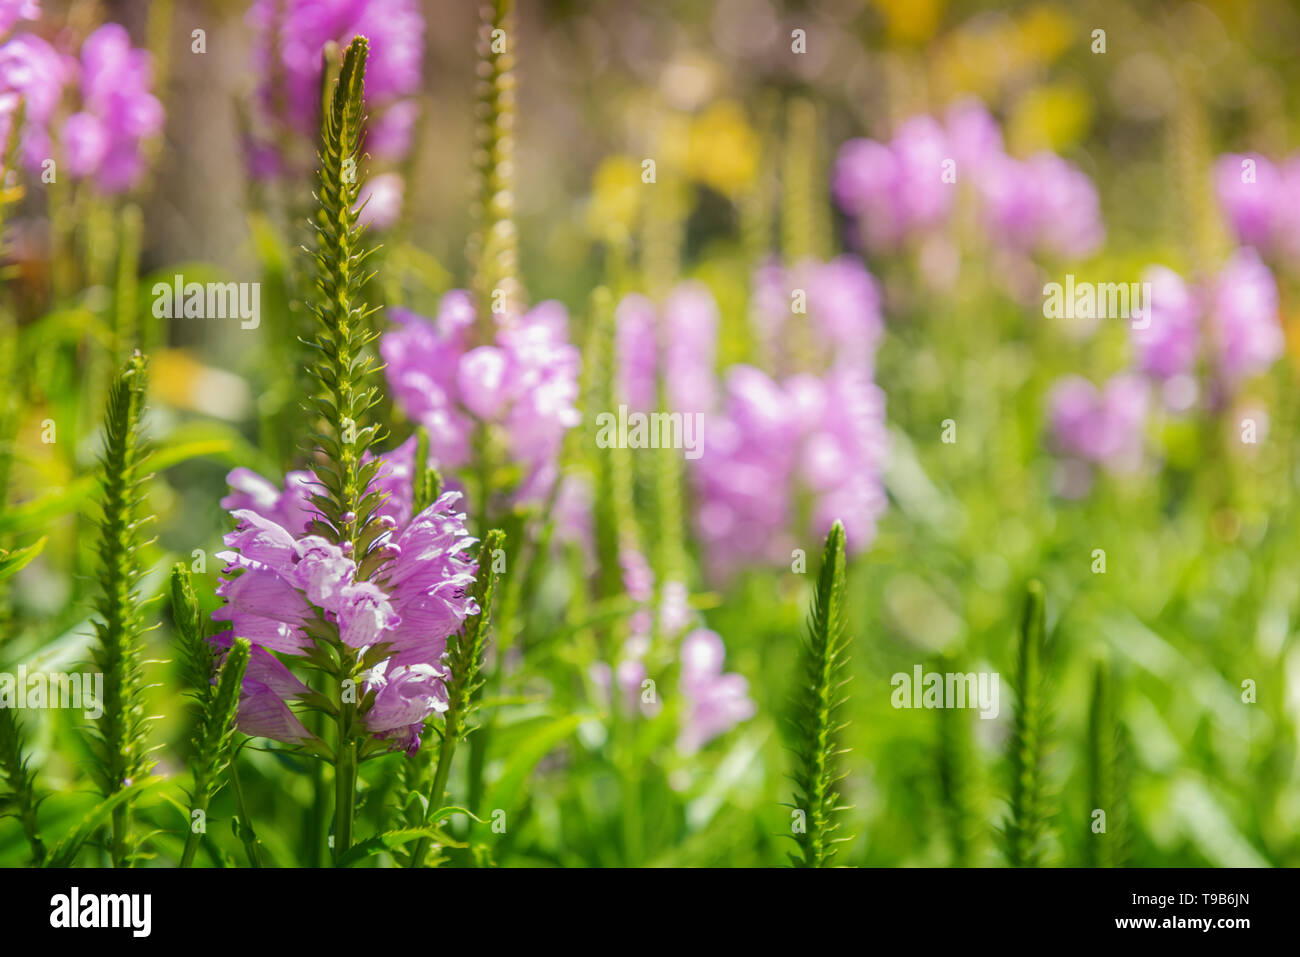 Close-up of beautiful wild pink flower in green grass at sunrise. Unfocused blooming meadow at background. Selective focus. Summer or spring horizonta Stock Photo